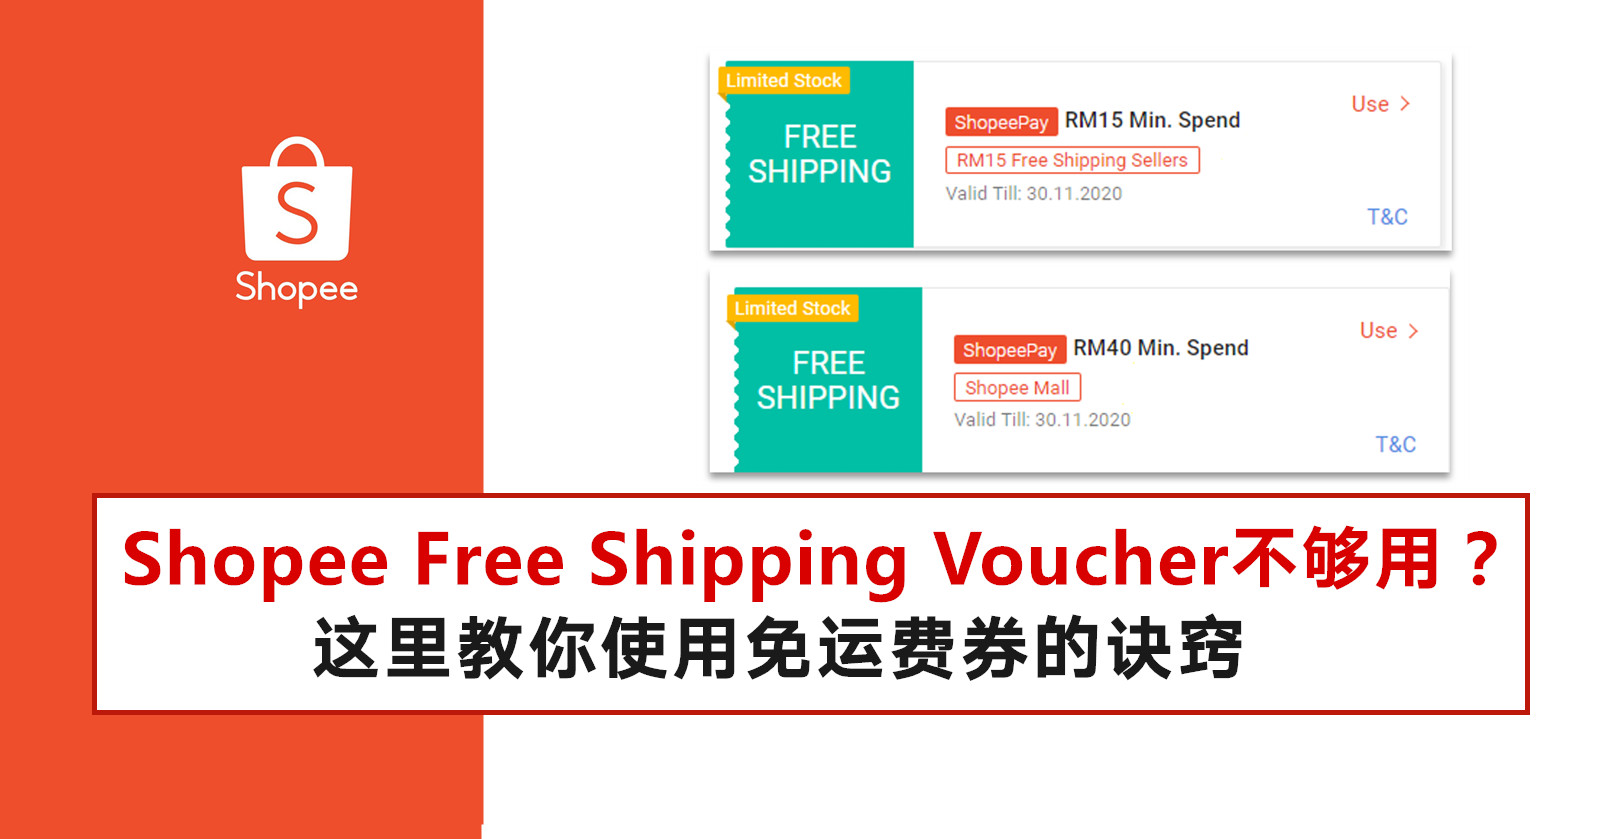 Smallwoods Free Shipping Voucher - wide 8